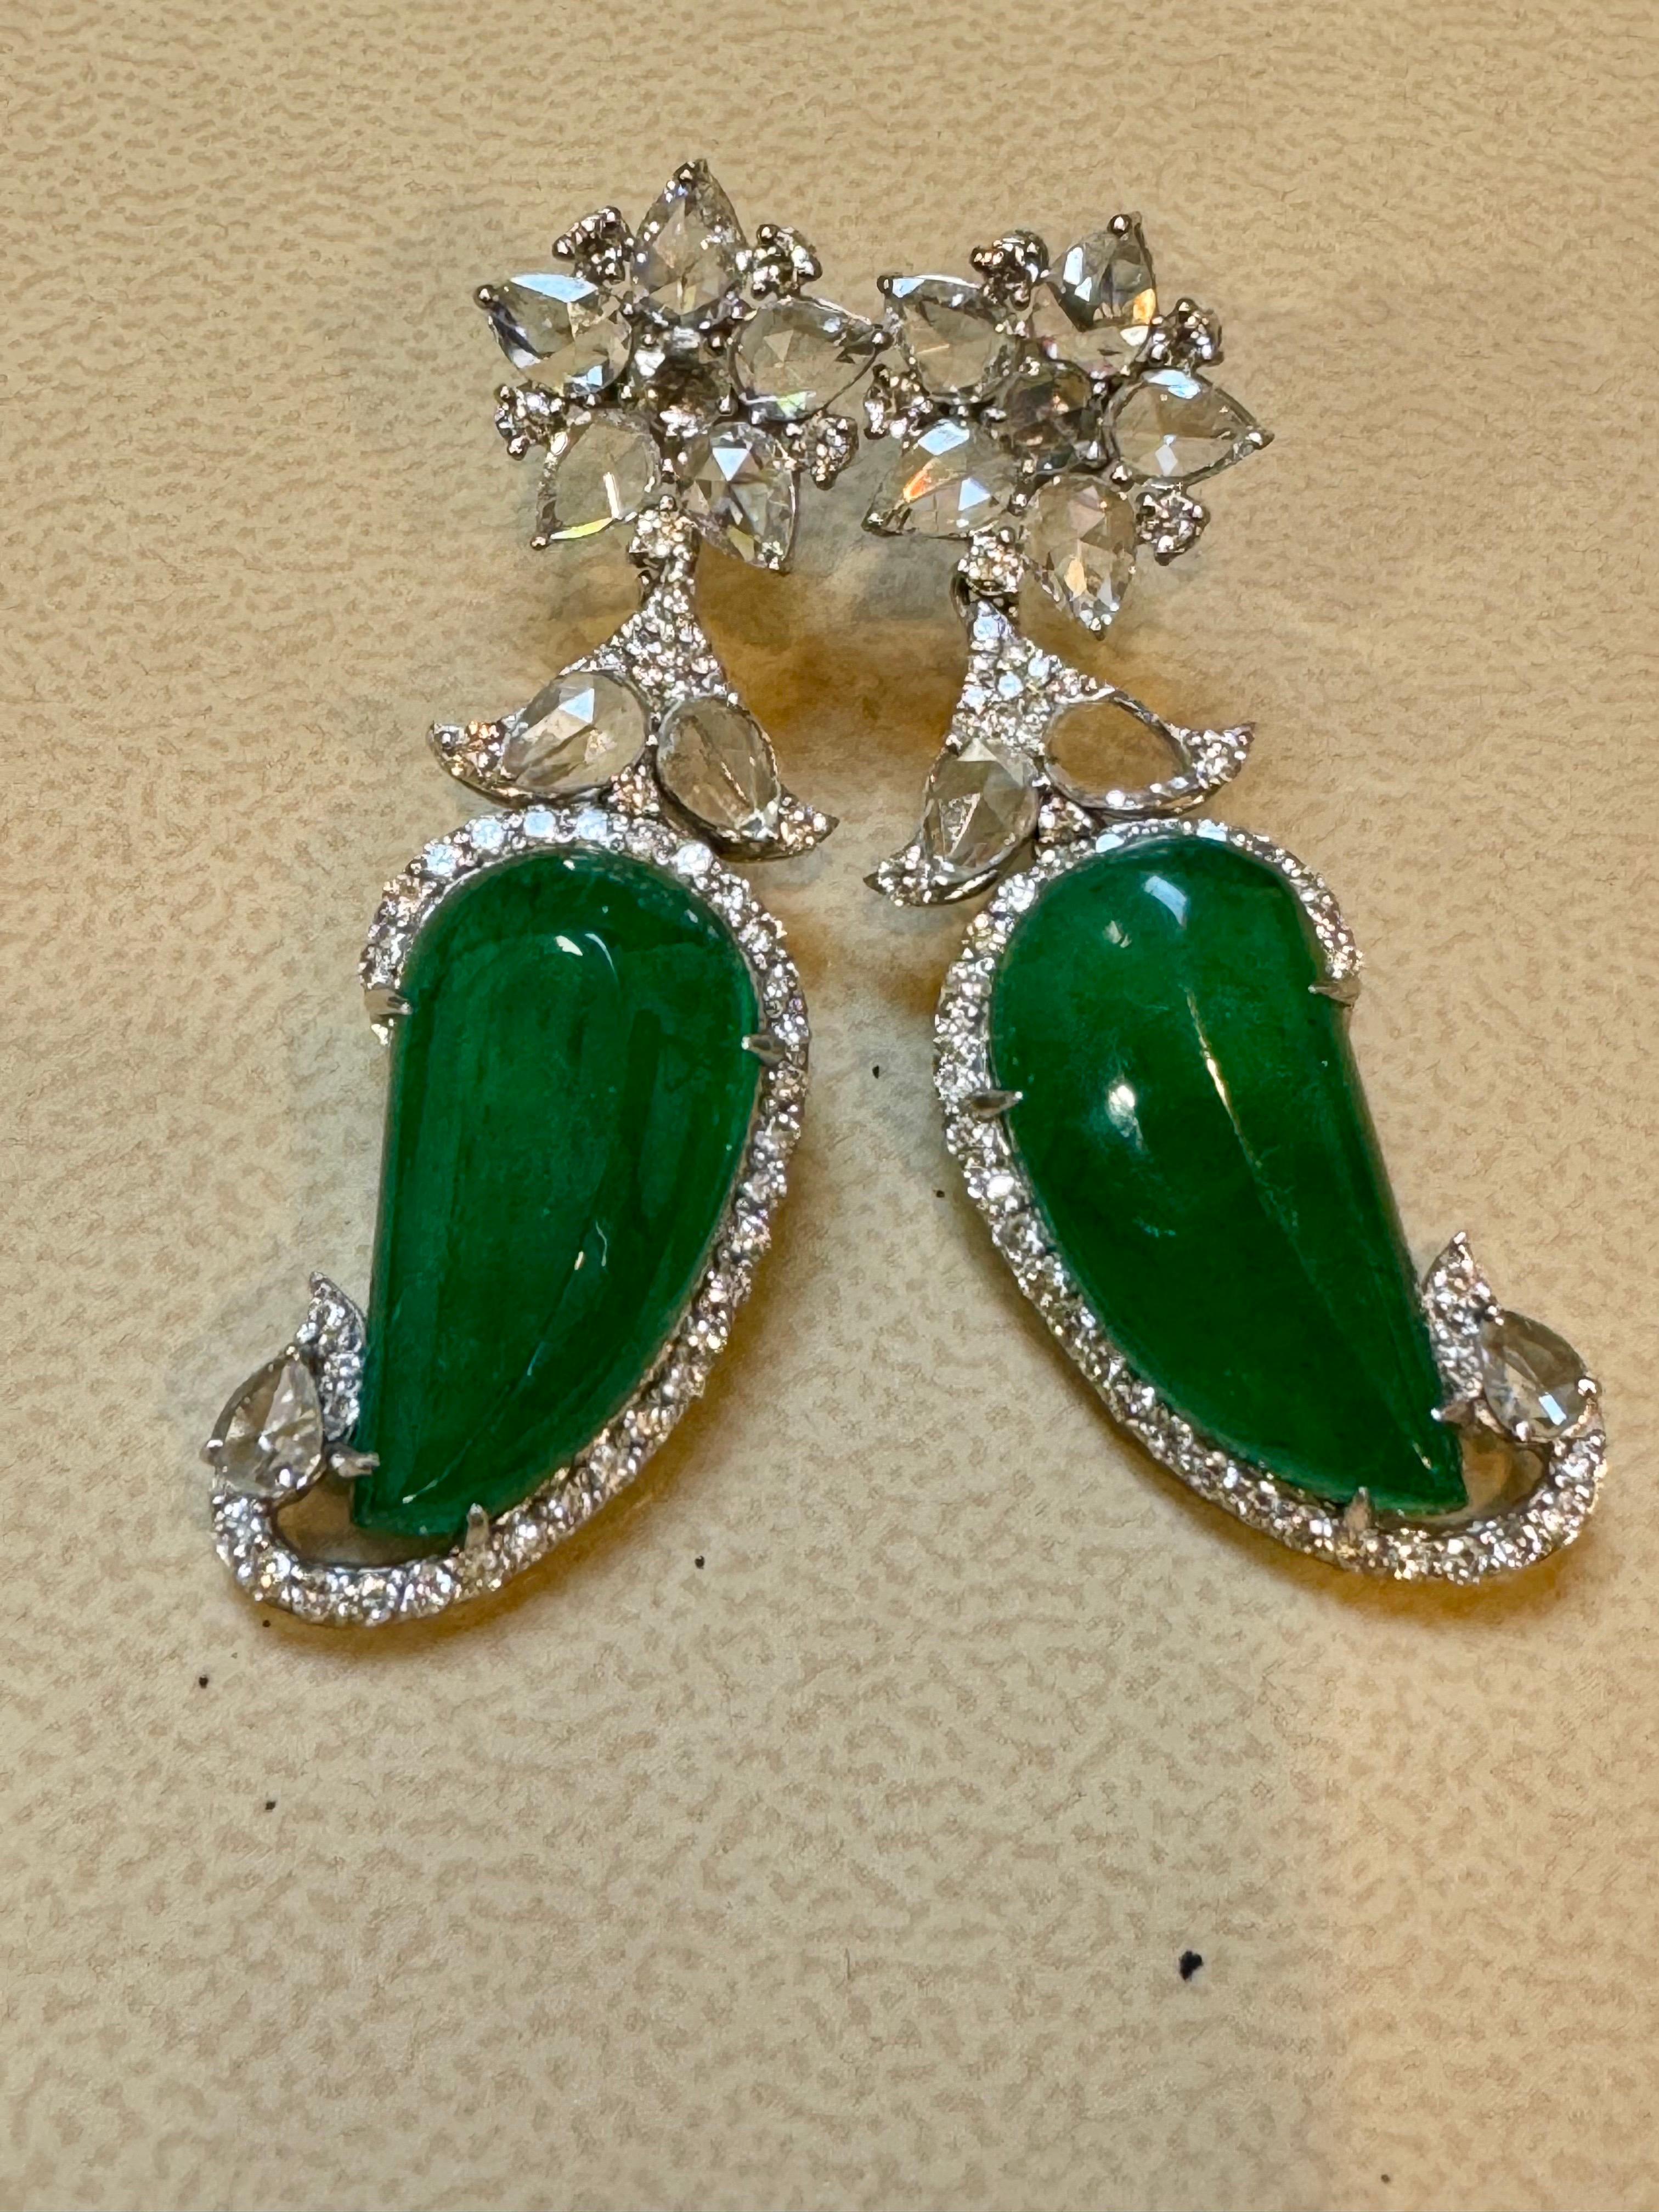 20 Ct Fine Emerald Cabochon & 4 Ct Rose Cut Diamond  18 Kt White Gold  Earrings For Sale 8